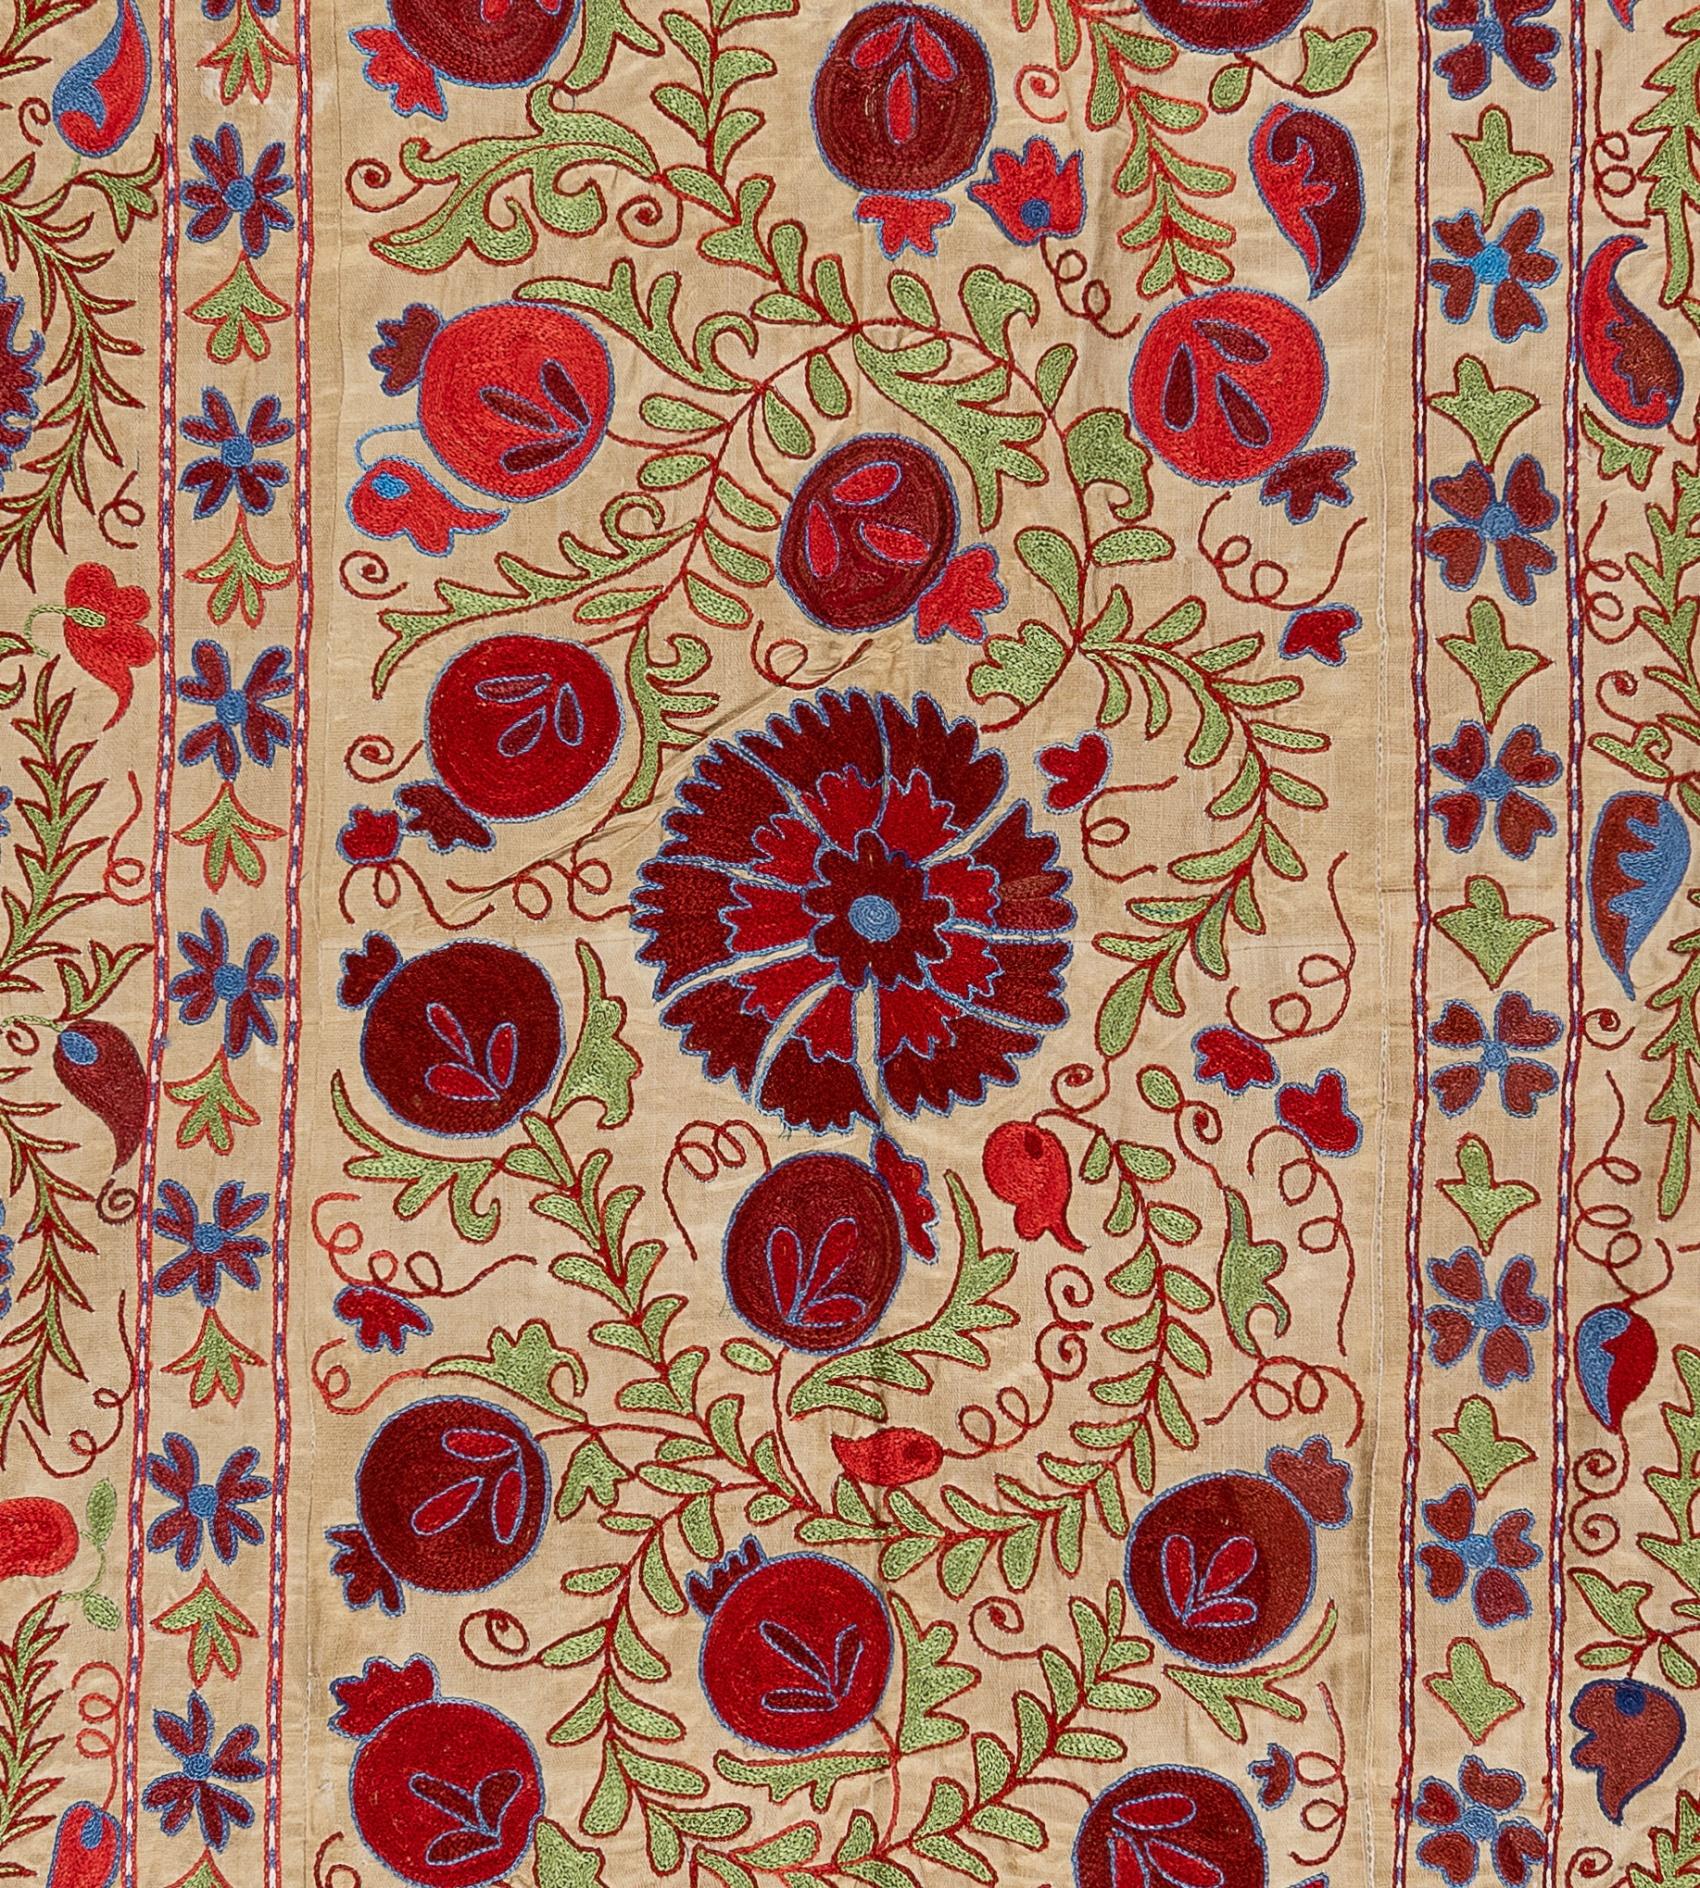 Uzbek New Home Decor Bedspread, Embroidered Tablecloth, Silk Wall Hanging. 4.7x7 ft For Sale